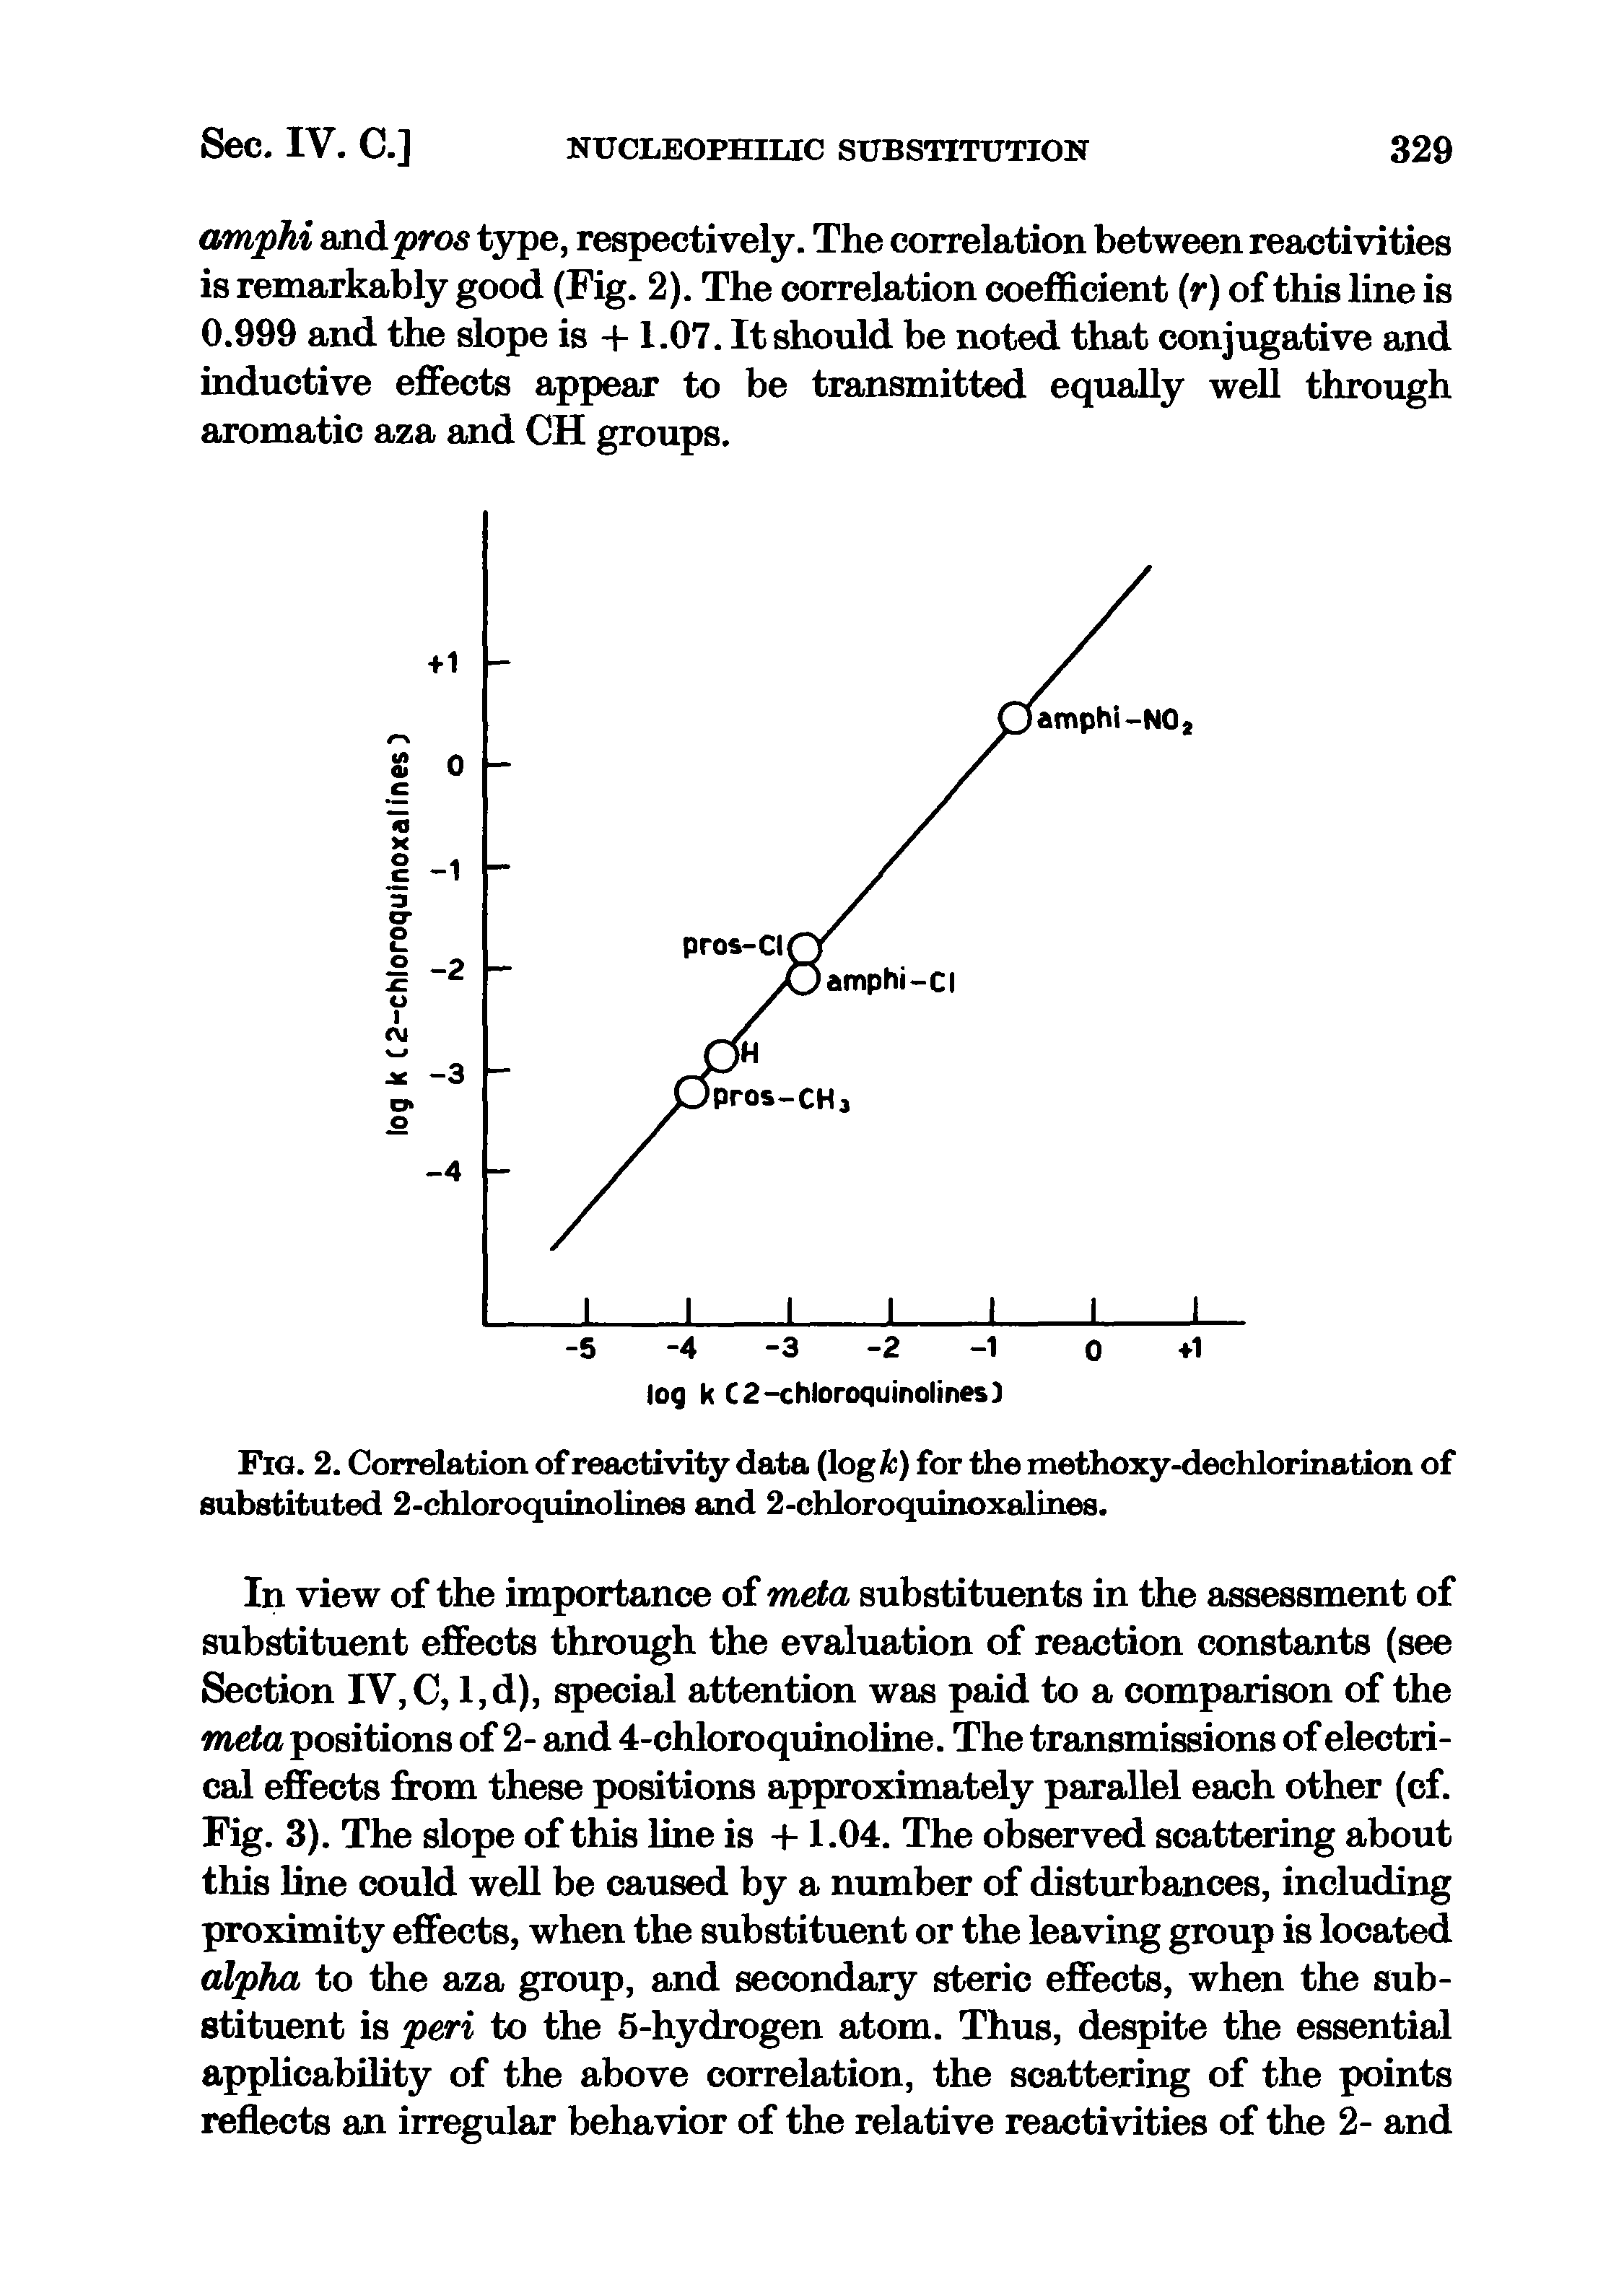 Fig. 2, Correlation of reactivity data (log A ) for the methoxy-dechlorination of substituted 2-chloroquinolmes and 2-chloroquinoxalines.